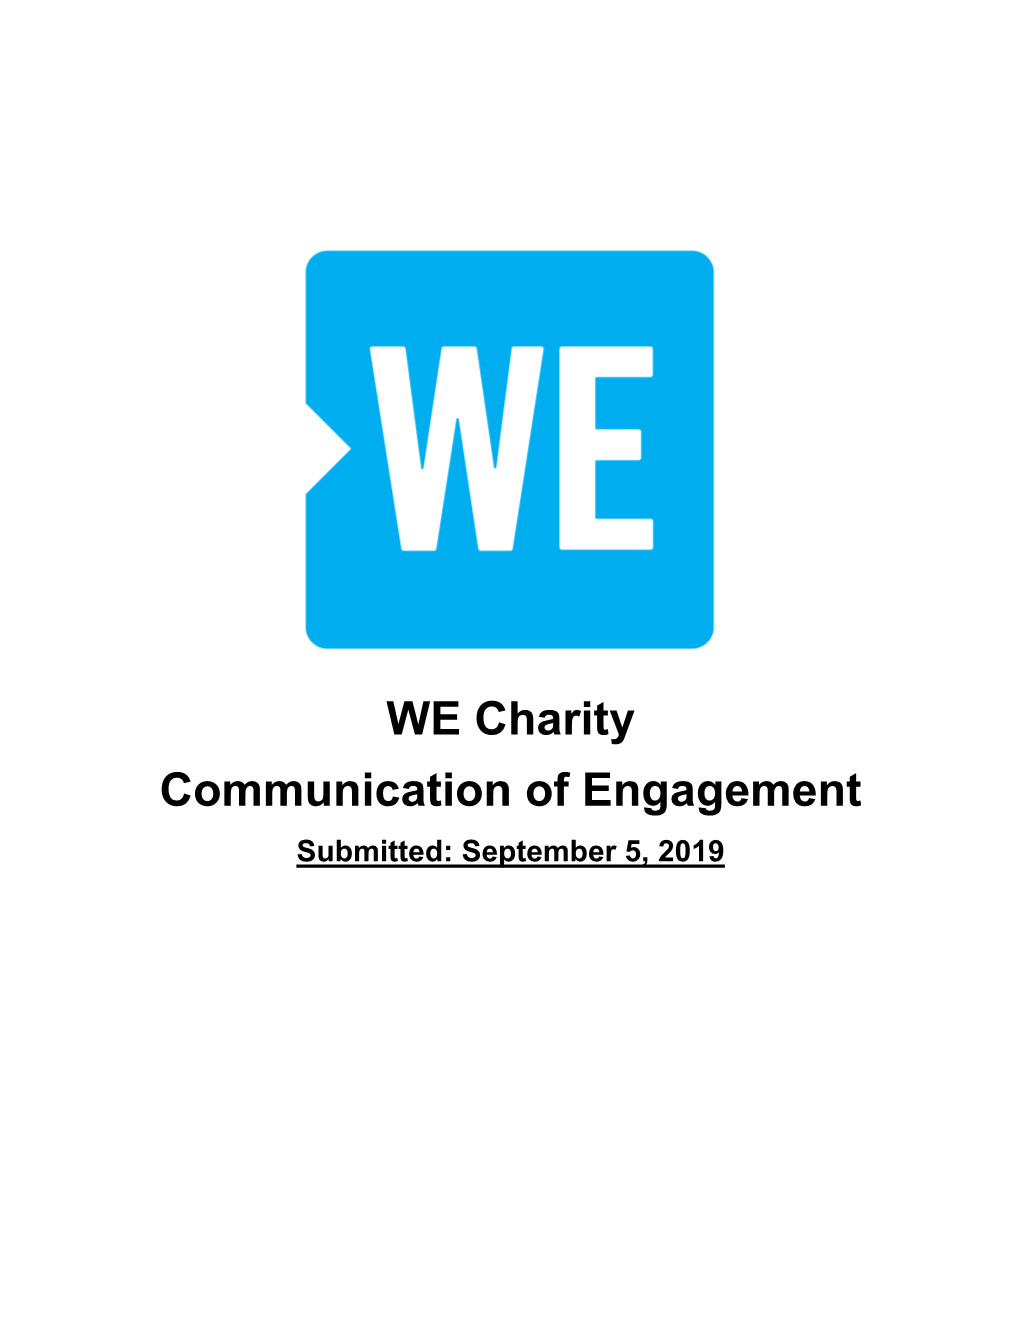 WE Charity Communication of Engagement Submitted: September 5, 2019